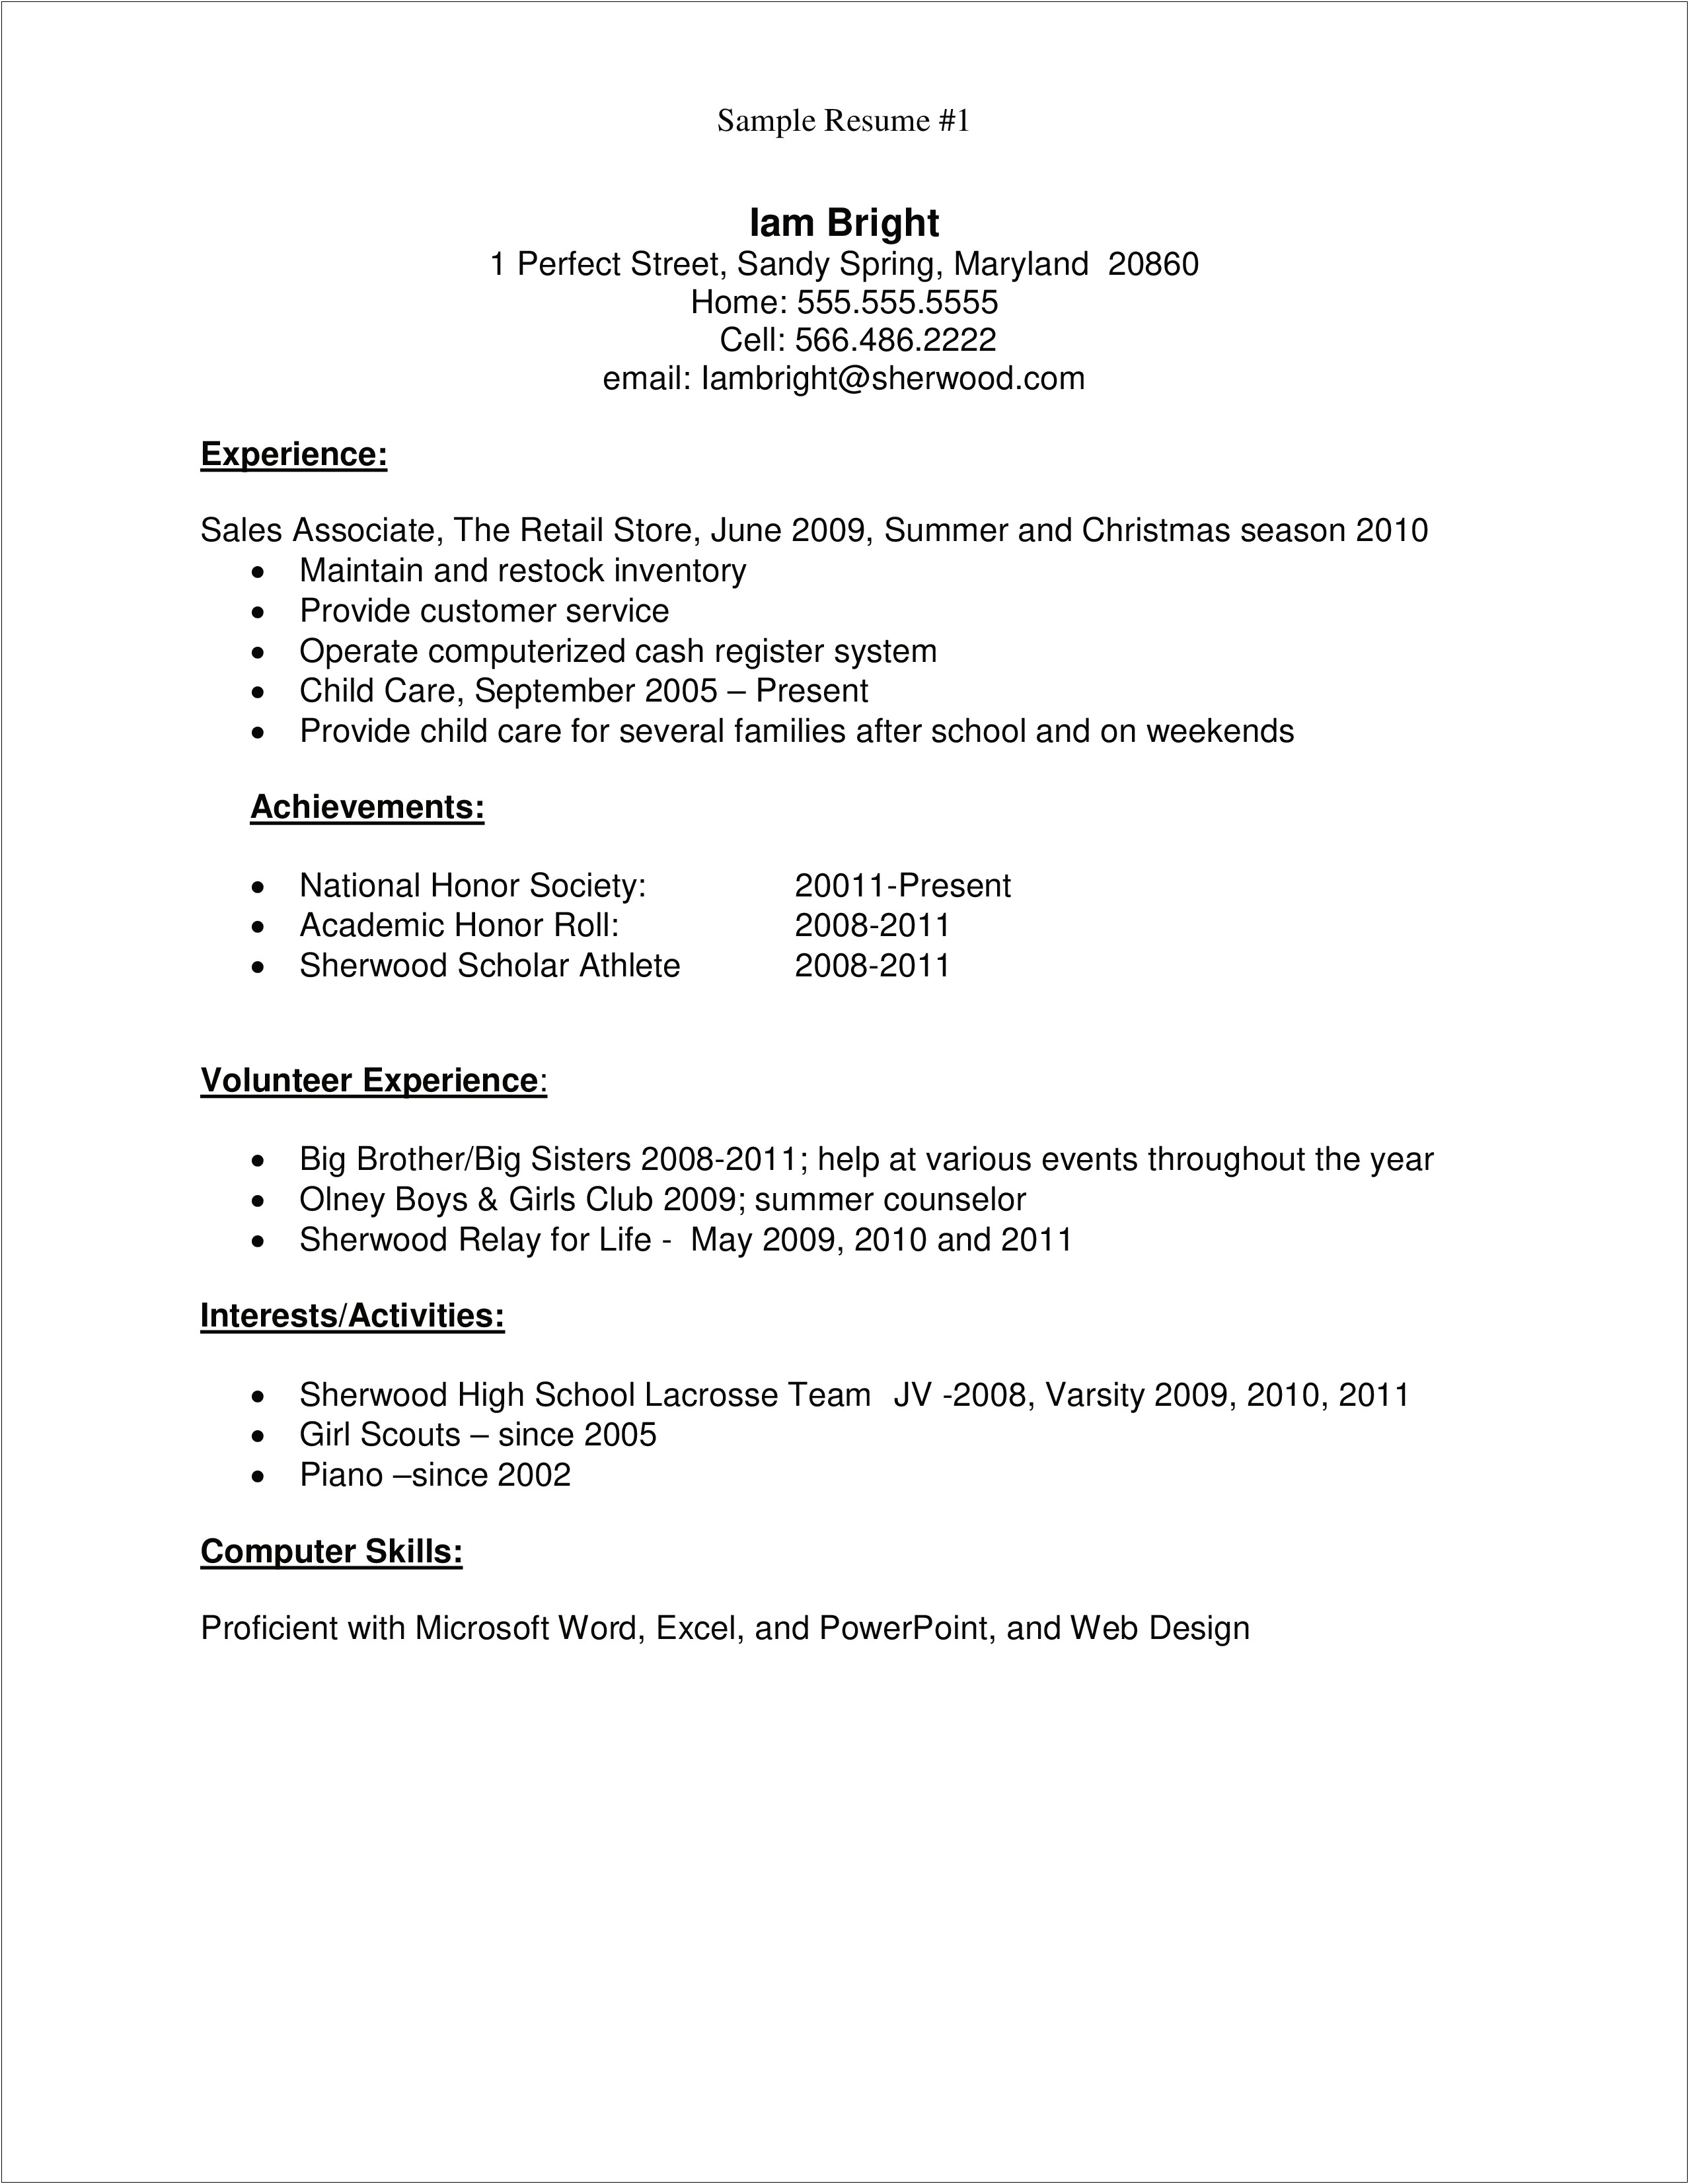 Templates For Resume Hifg School Students